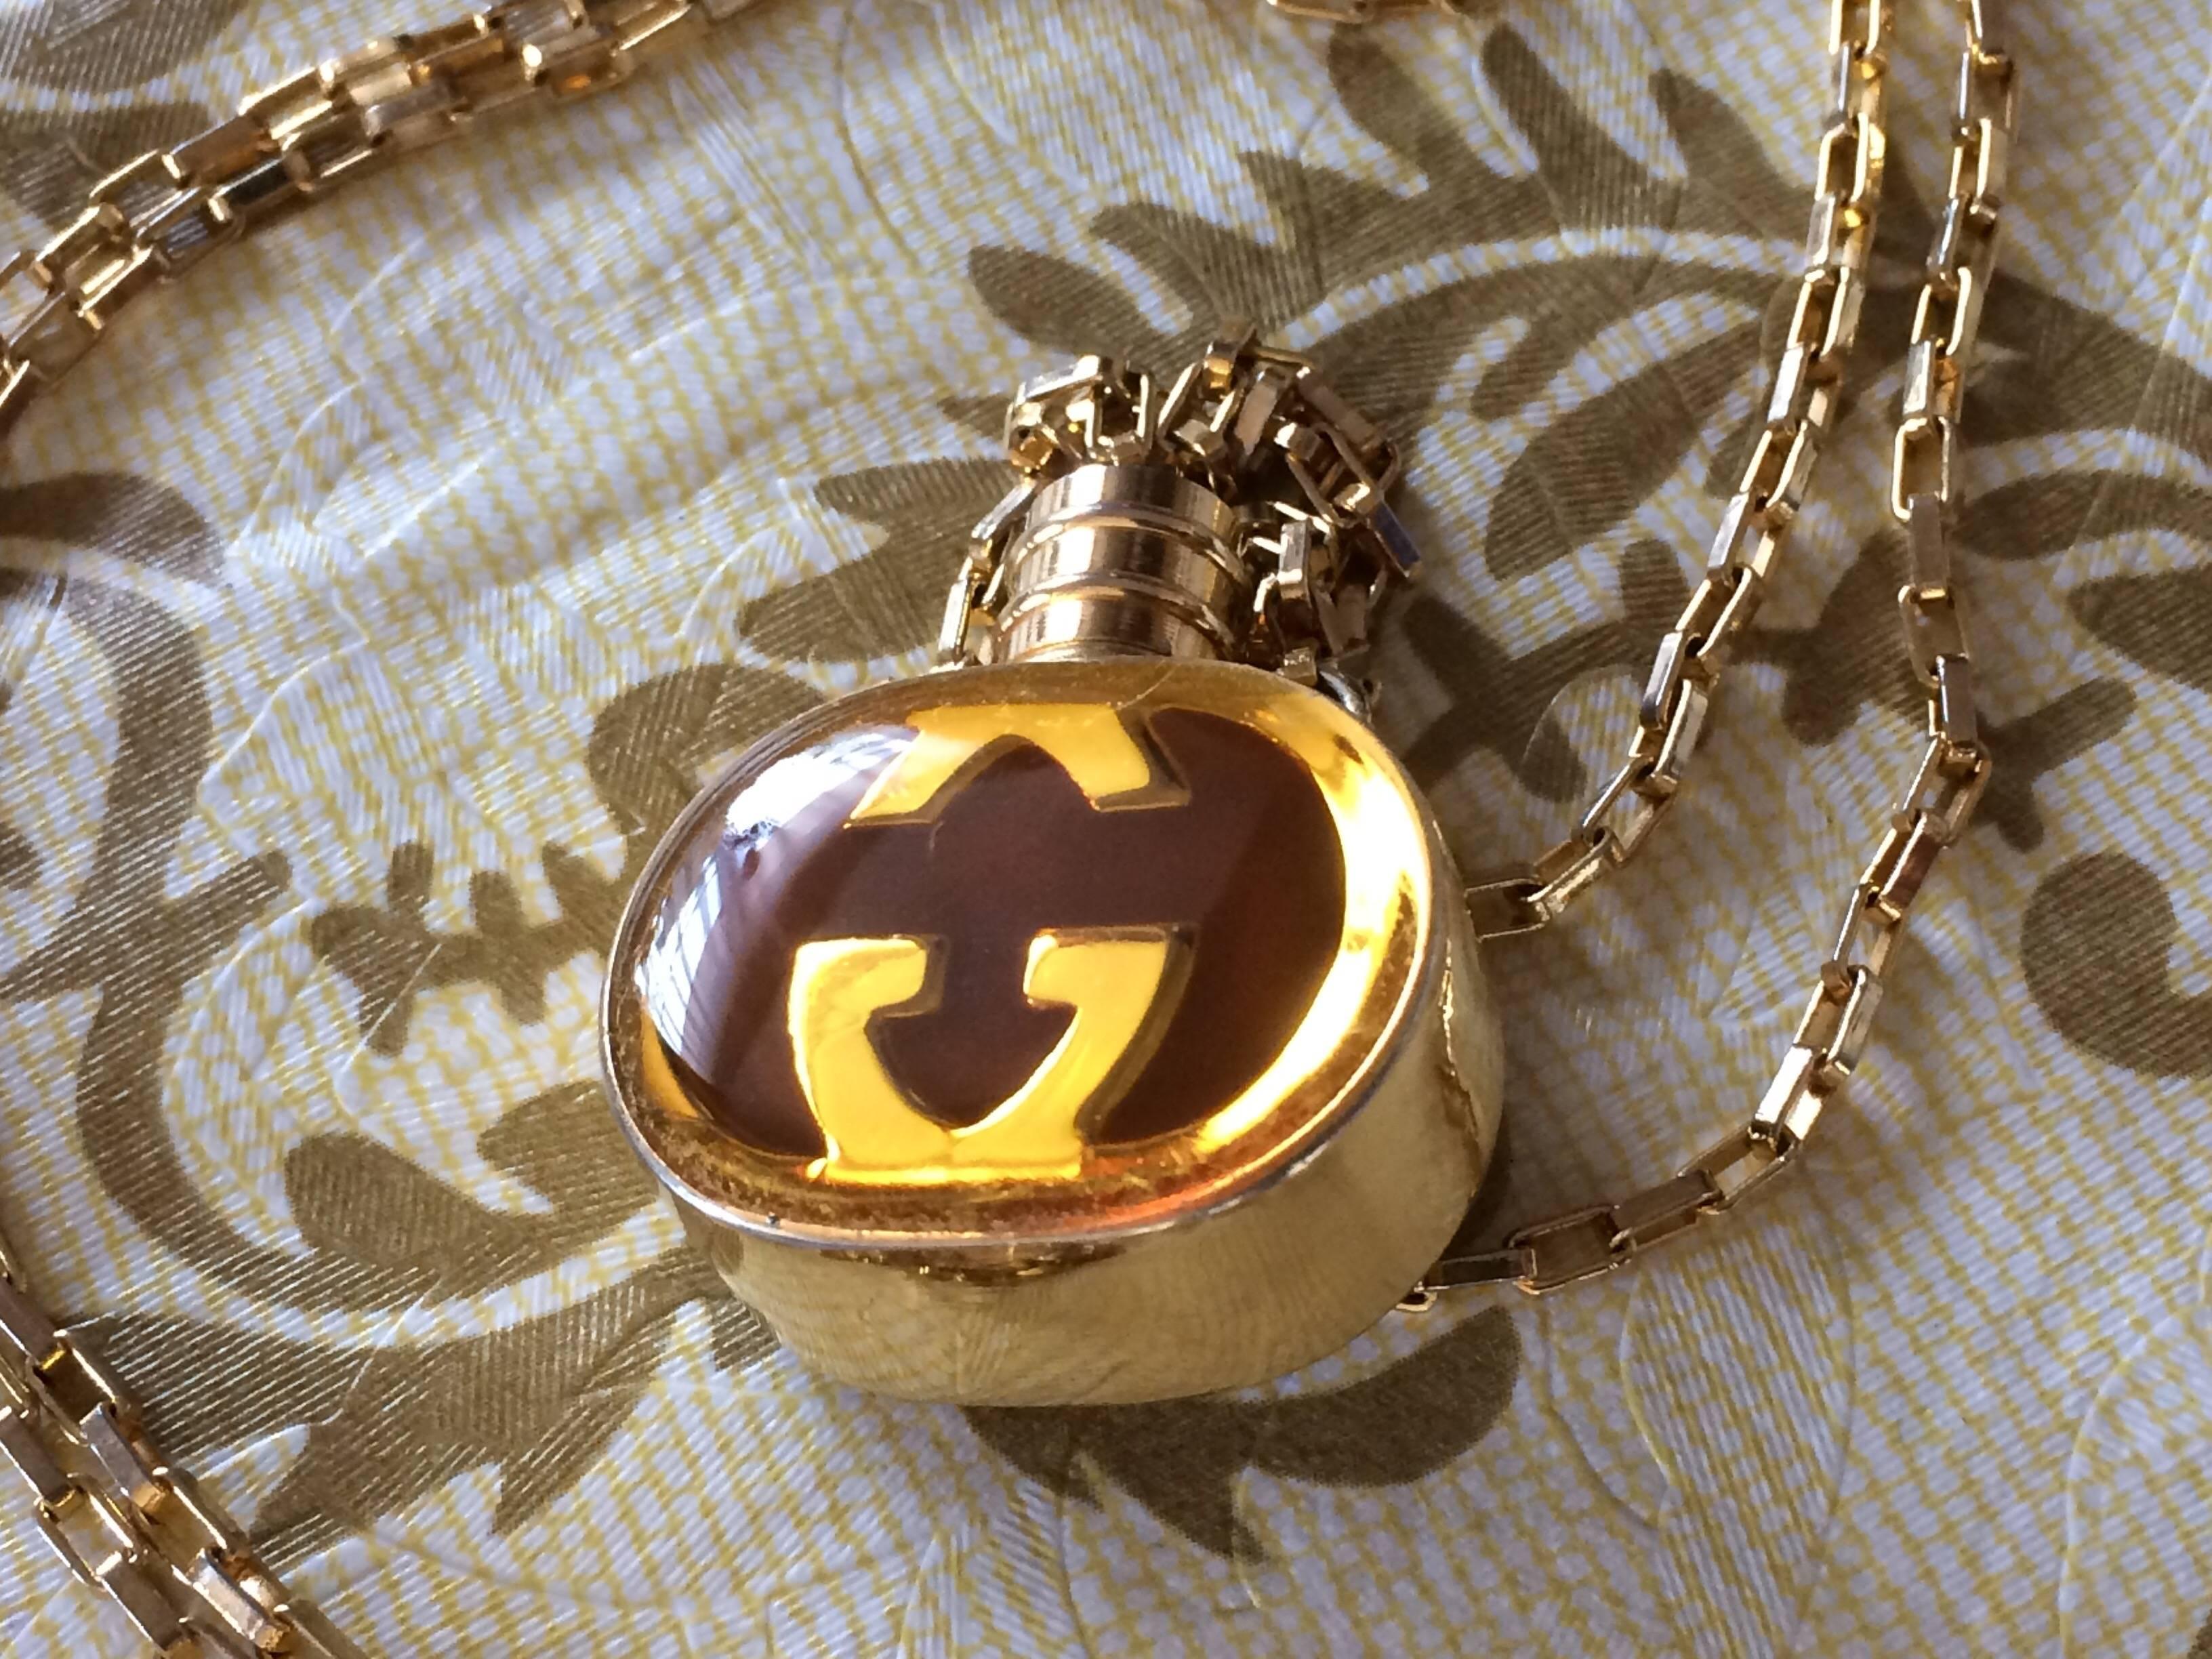 1980s. Vintage Gucci gold and brown round shape perfume bottle necklace with iconic logo mark. Perfect rare Gucci gift.

Beautiful vintage condition!

If you are looking for vintage Gucci necklace, then do not miss this opportunity!
Here is